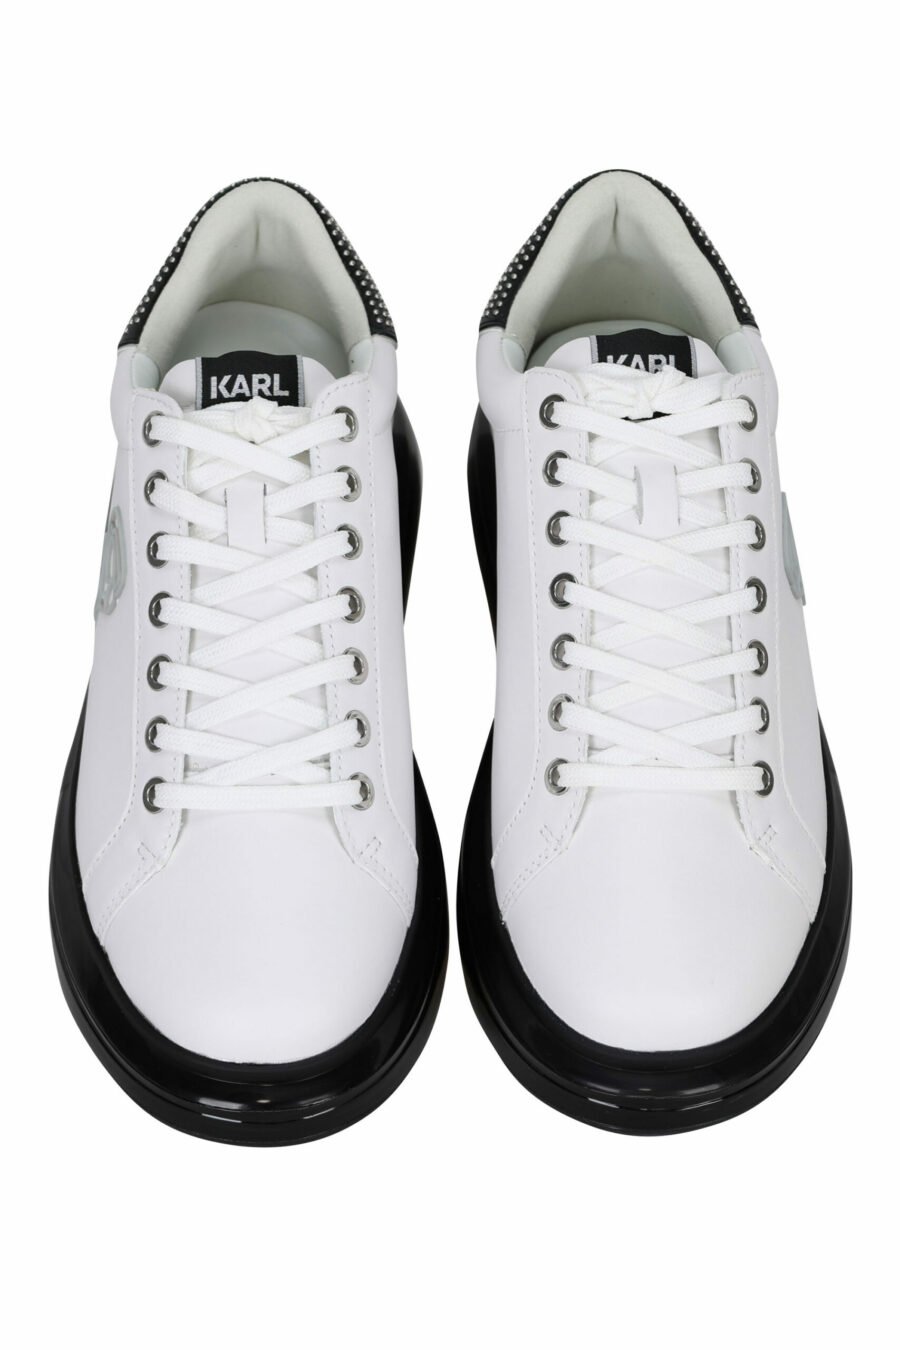 White trainers "kapri fushion" with black sole and logo in outline - 5059529363467 4 scaled